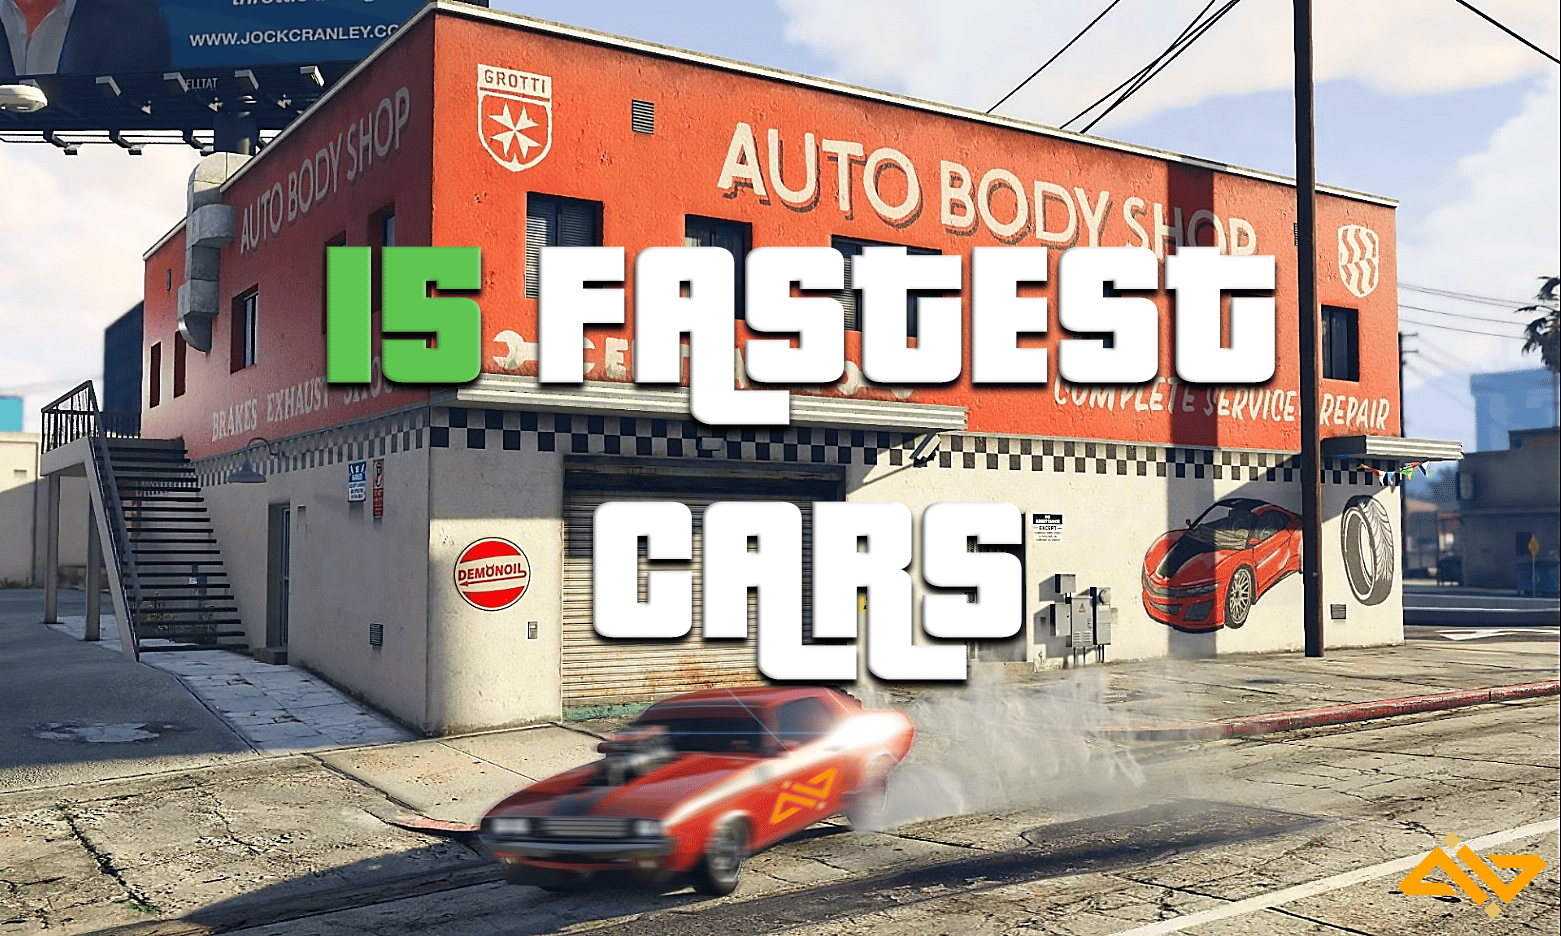 Fastest Cars in GTA 5 Story Mode: Best GTA Cars Ranked List